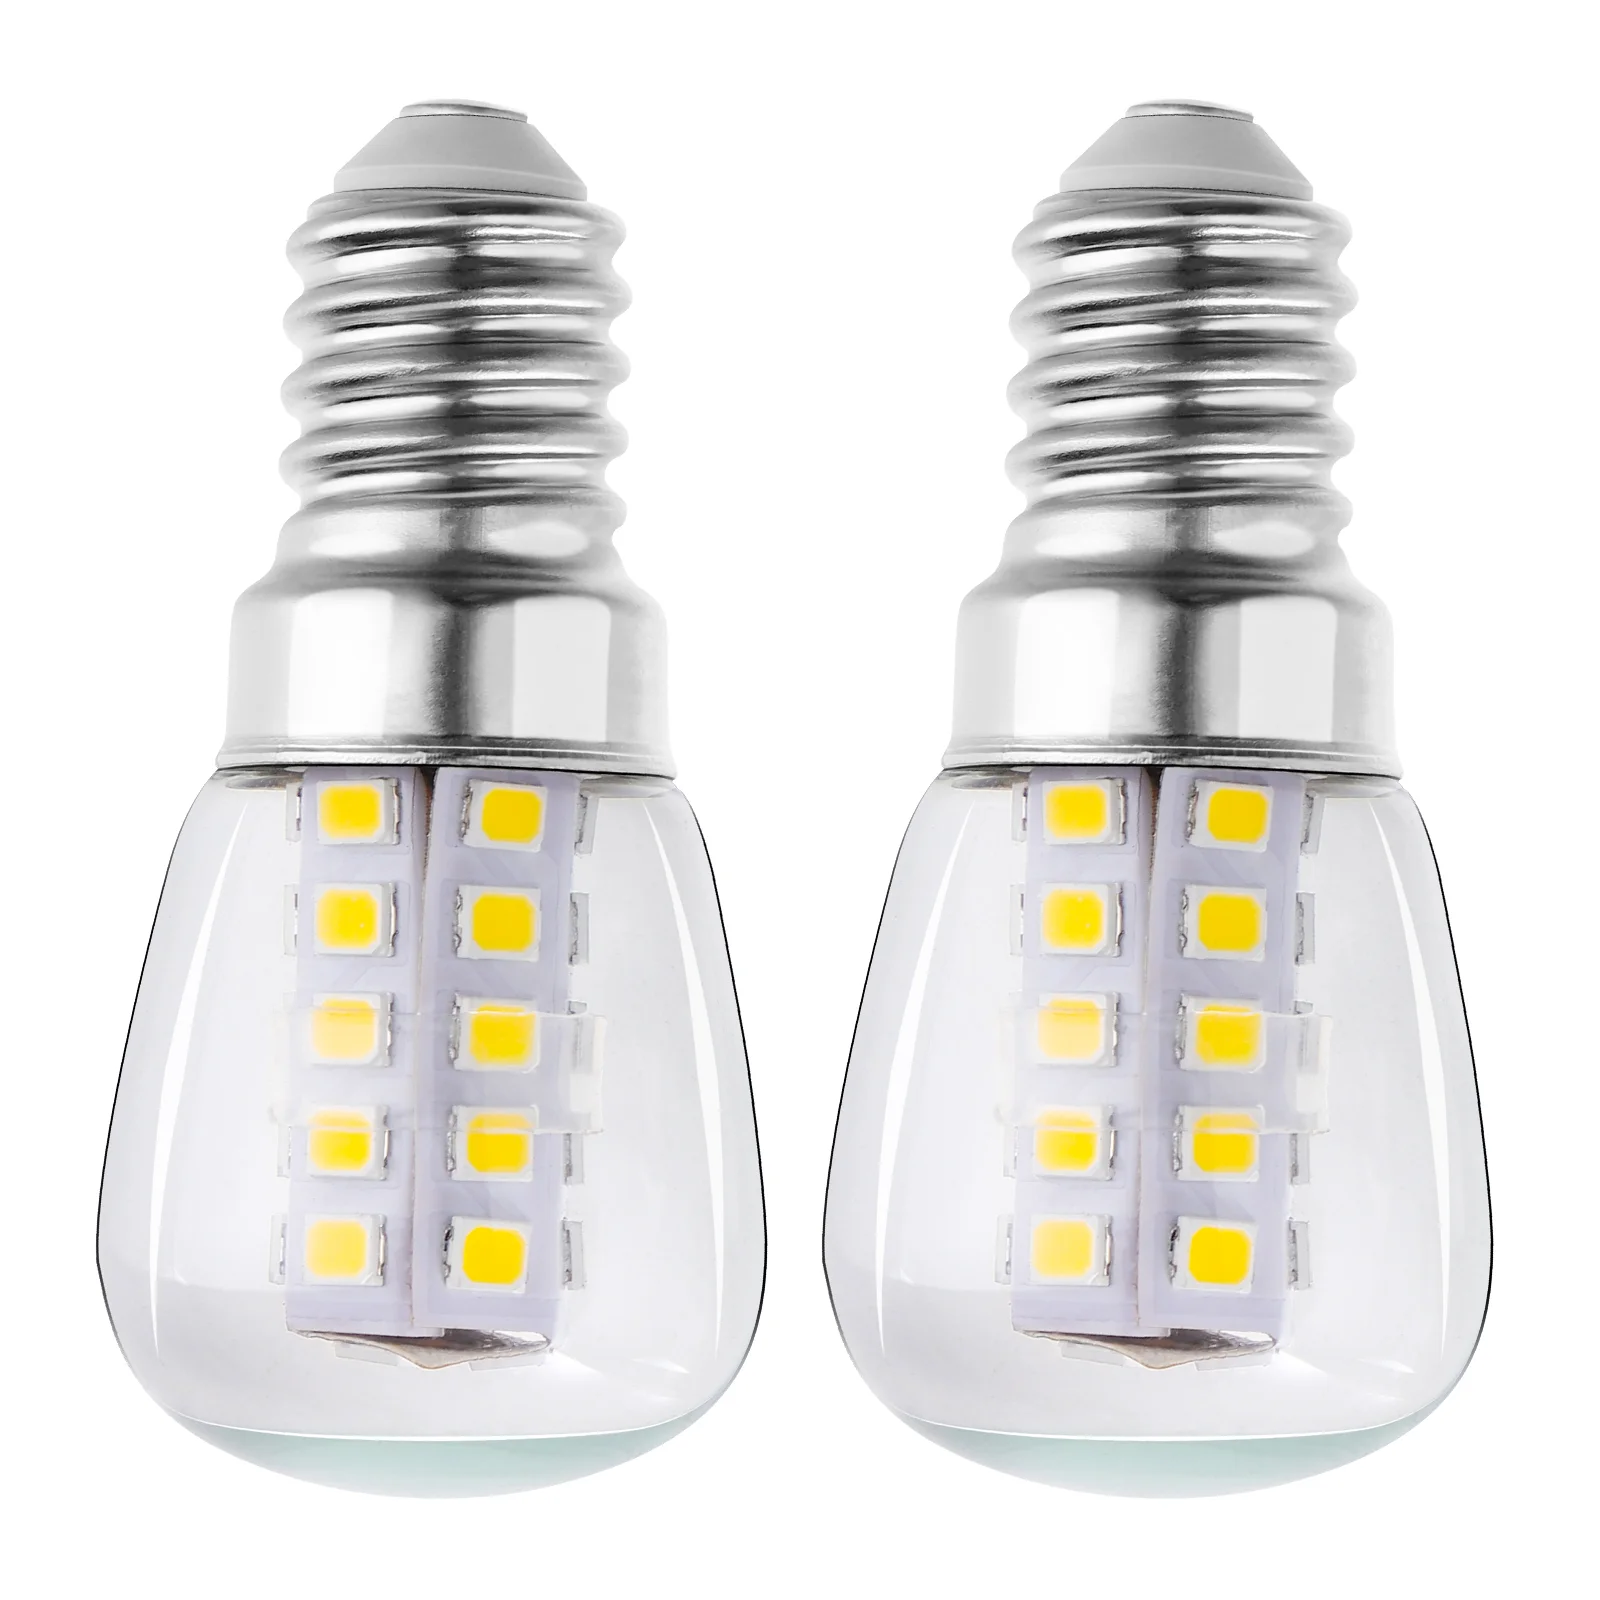 

Appliance Microwave Light Bulbs 3W for Oven Refrigerator Sewing Needles Machine Lamp Fridge